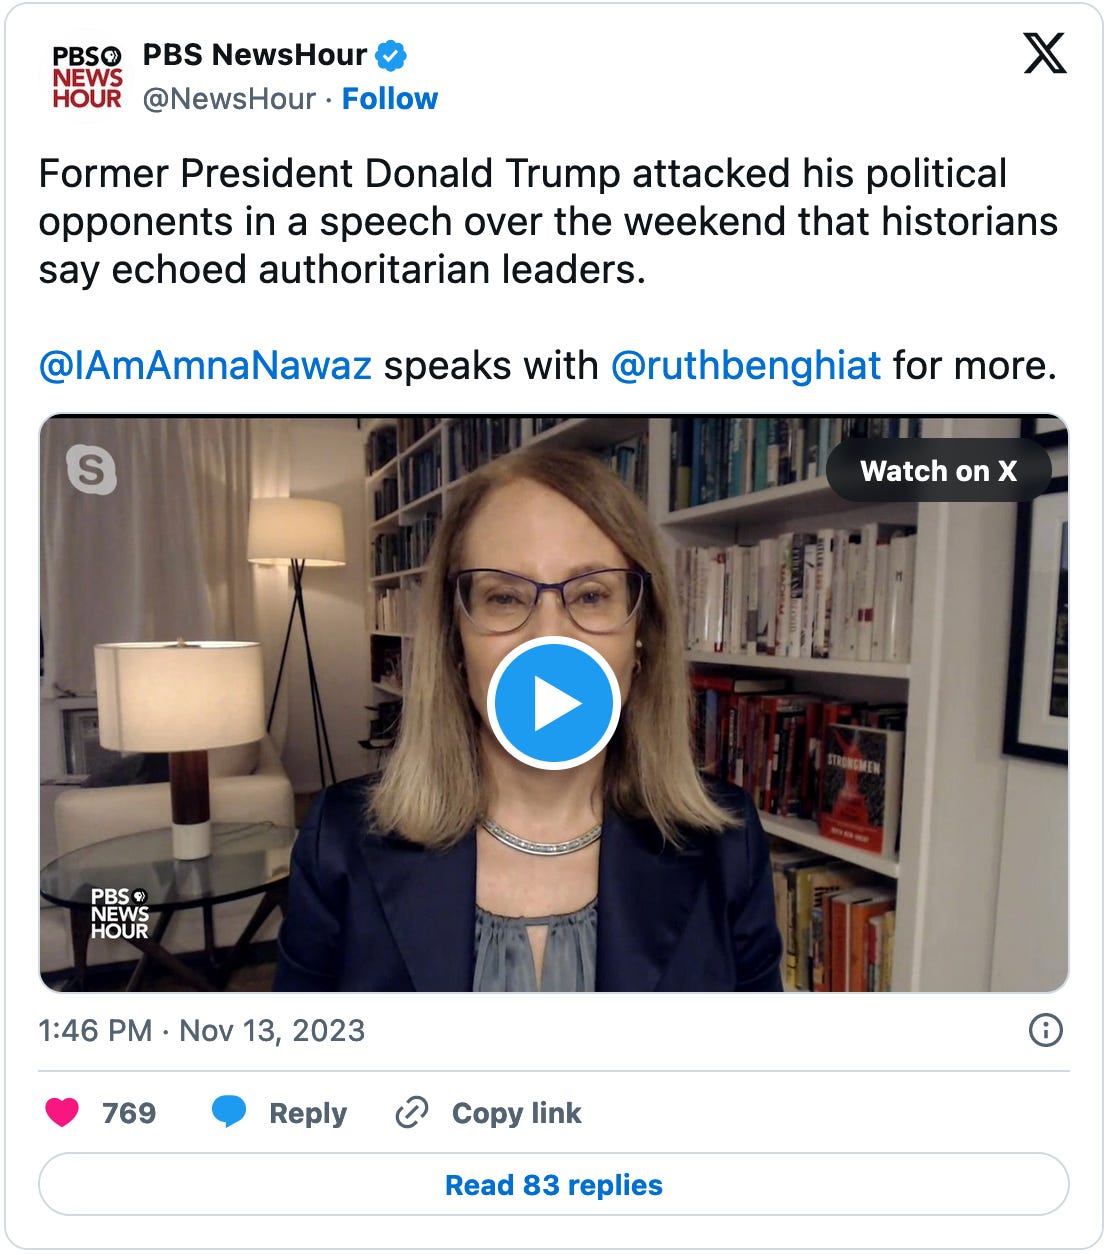 November 13, 2023 tweet from PBS NewsHour reading, "Former President Donald Trump attacked his political opponents in a speech over the weekend that historians say echoed authoritarian leaders.  @IAmAmnaNawaz  speaks with @ruthbenghiat for more." The tweet also includes a screenshot of Ruth Ben Ghiat conducting an interview in front of a bookcase.